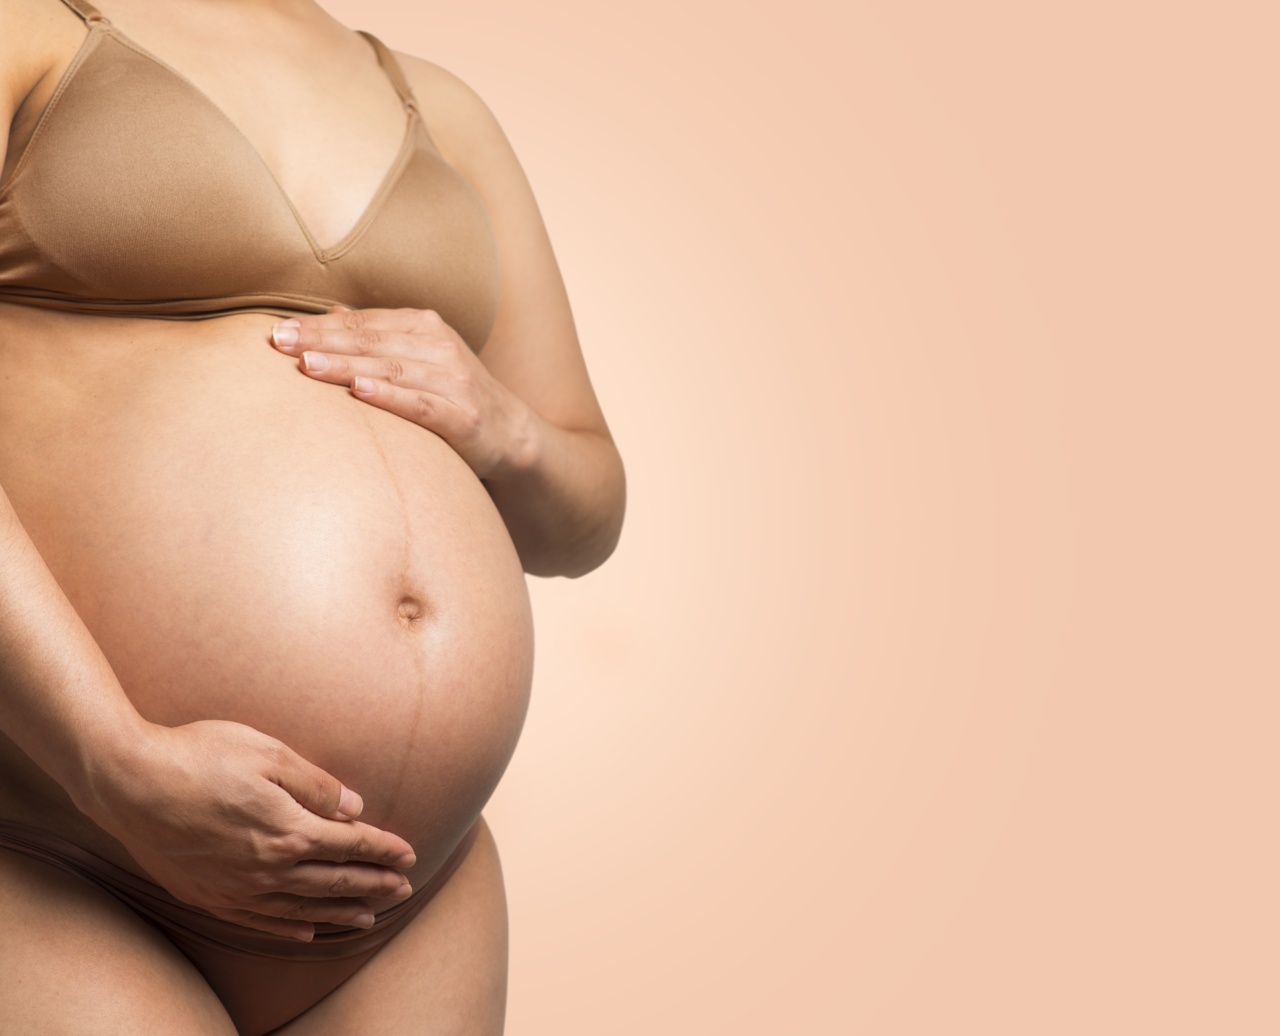 How does the woman’s body change in week 14 of pregnancy?